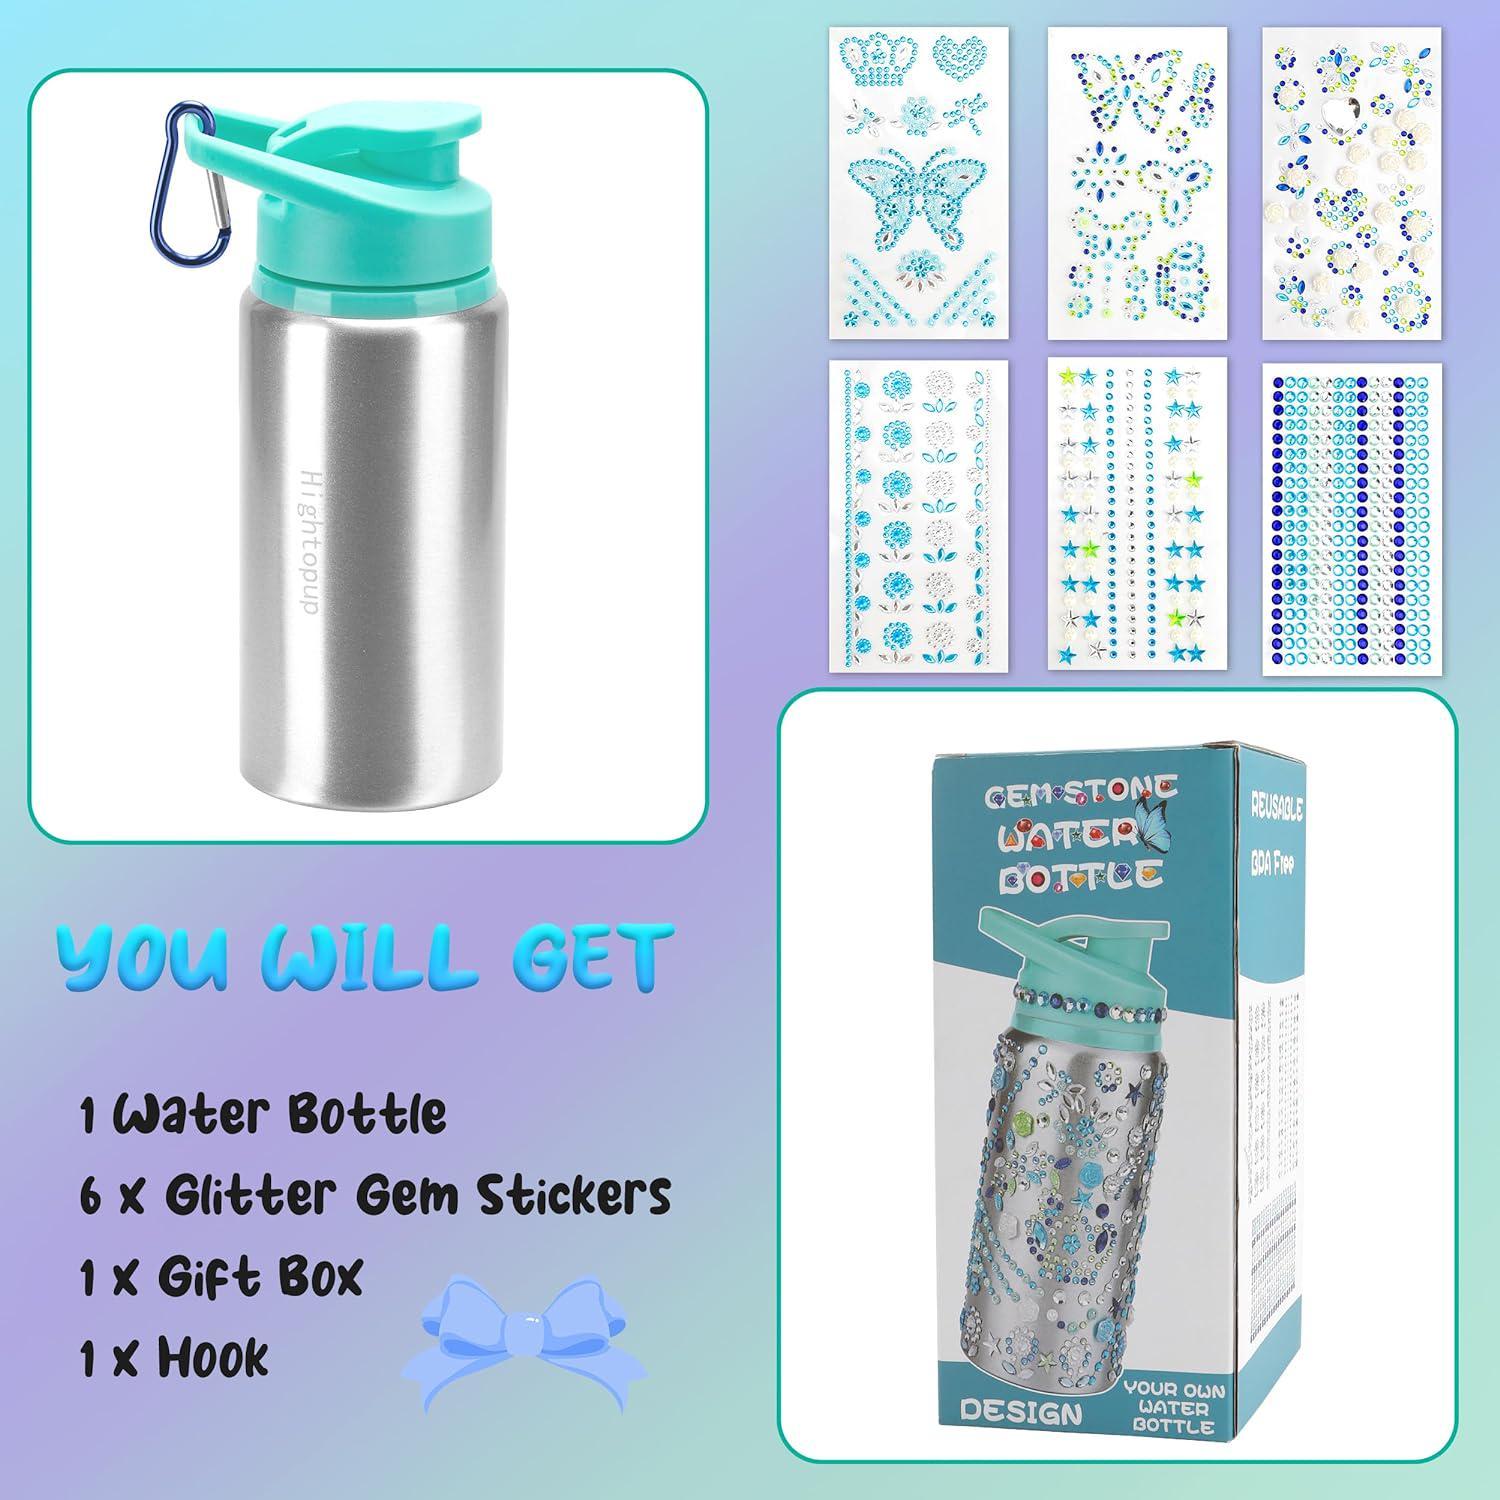 YOFUN Decorate Your Own Water Bottle with 11 Sheets of Unicorn Stickers &  Glitter Gems, Craft Kit & Art Kit for Children, Gift for Girls Age 4 5 6 7  8